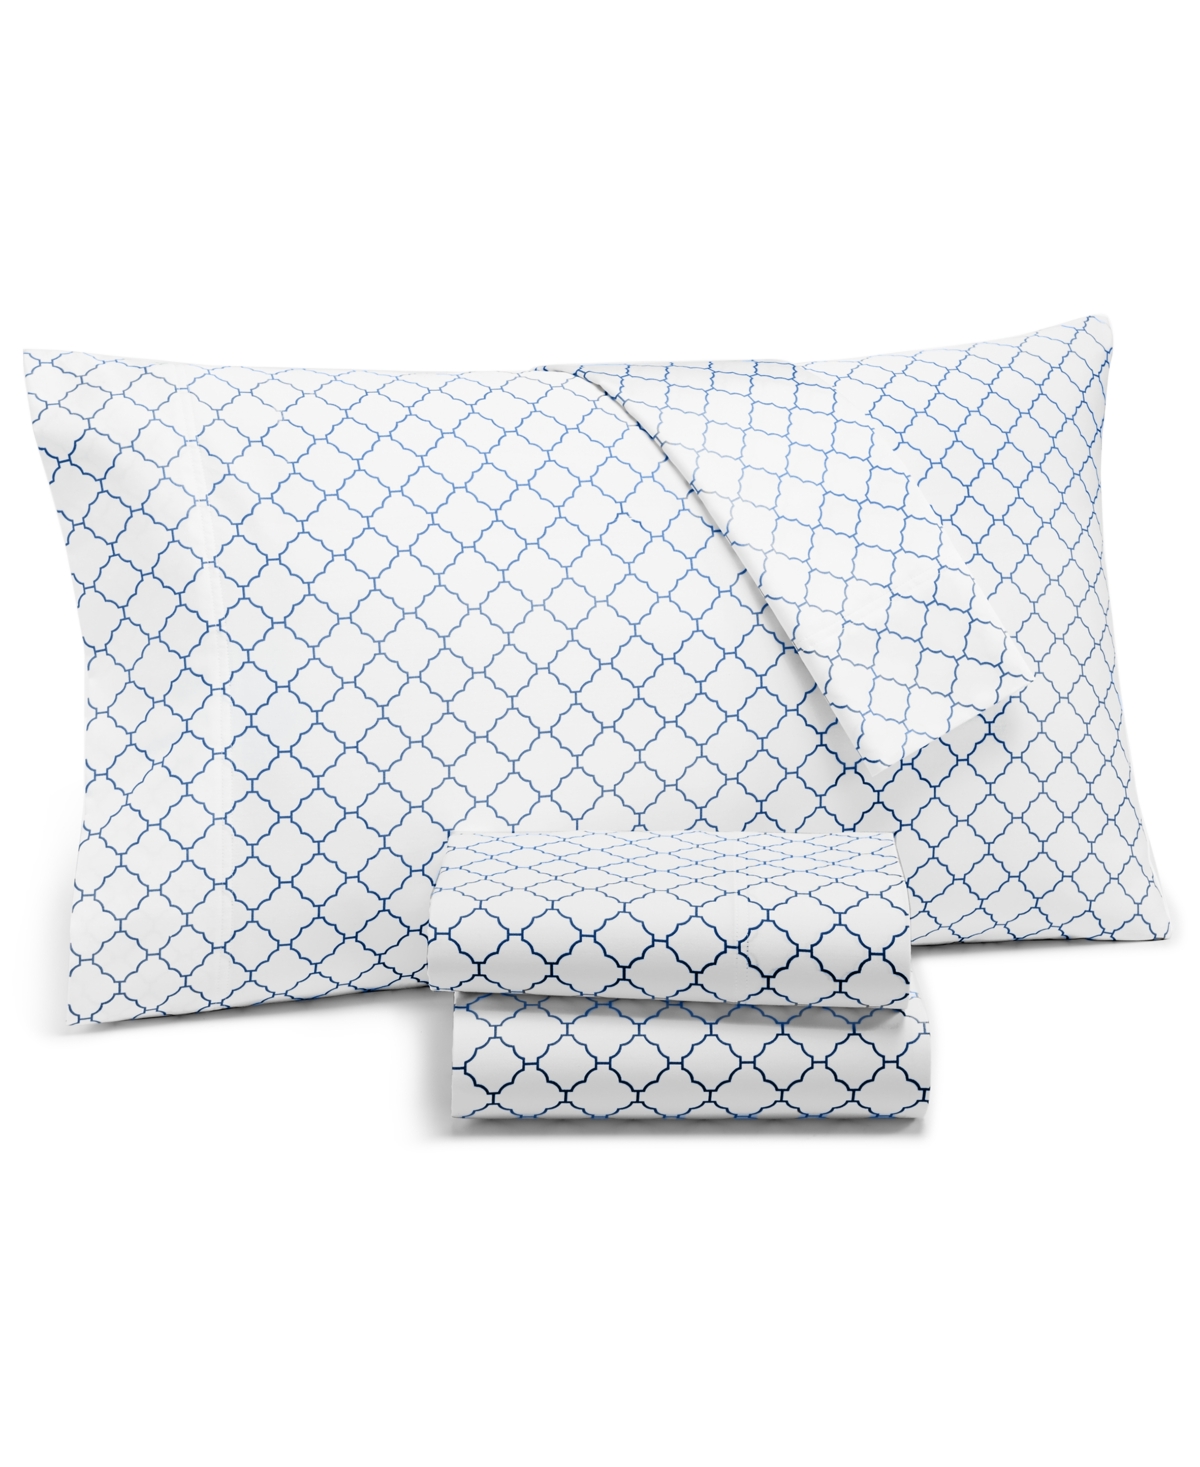 Charter Club Damask Designs 550 Thread Count Printed Cotton 4-pc. Sheet Set, California King, Created For Macy's In Arabesque Geo Cornflower